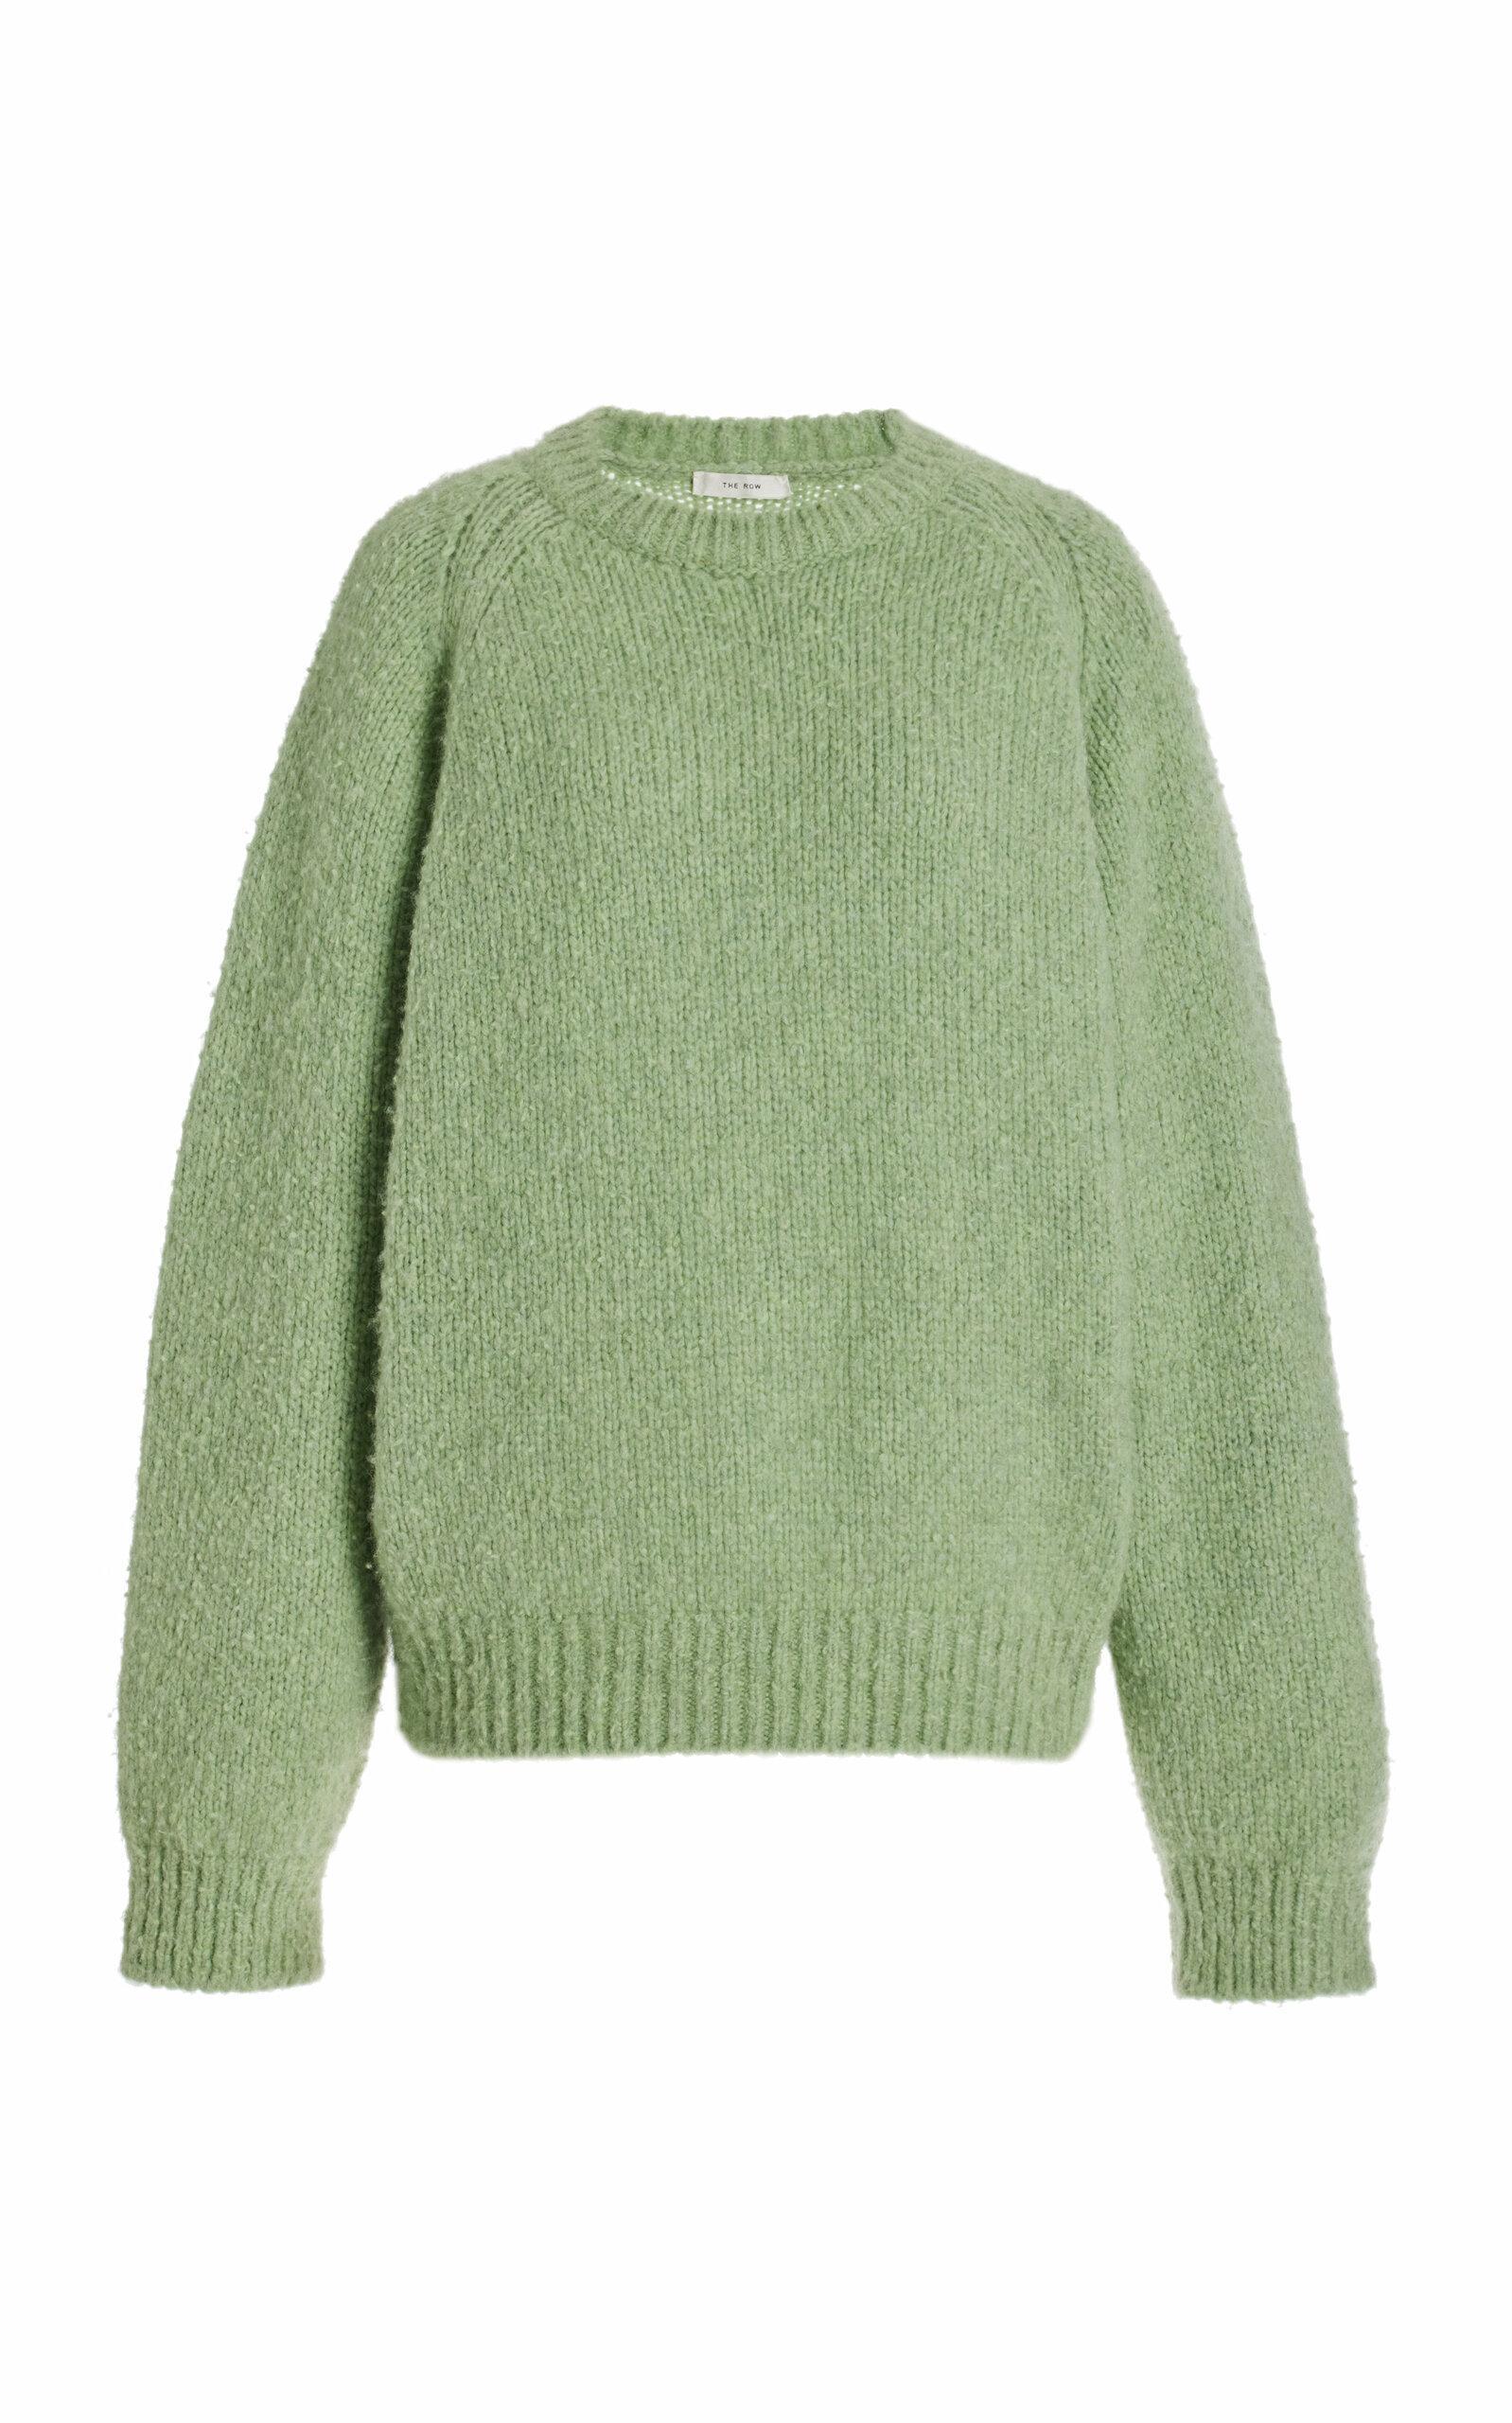 The Row Druna Cashmere Sweater Product Image